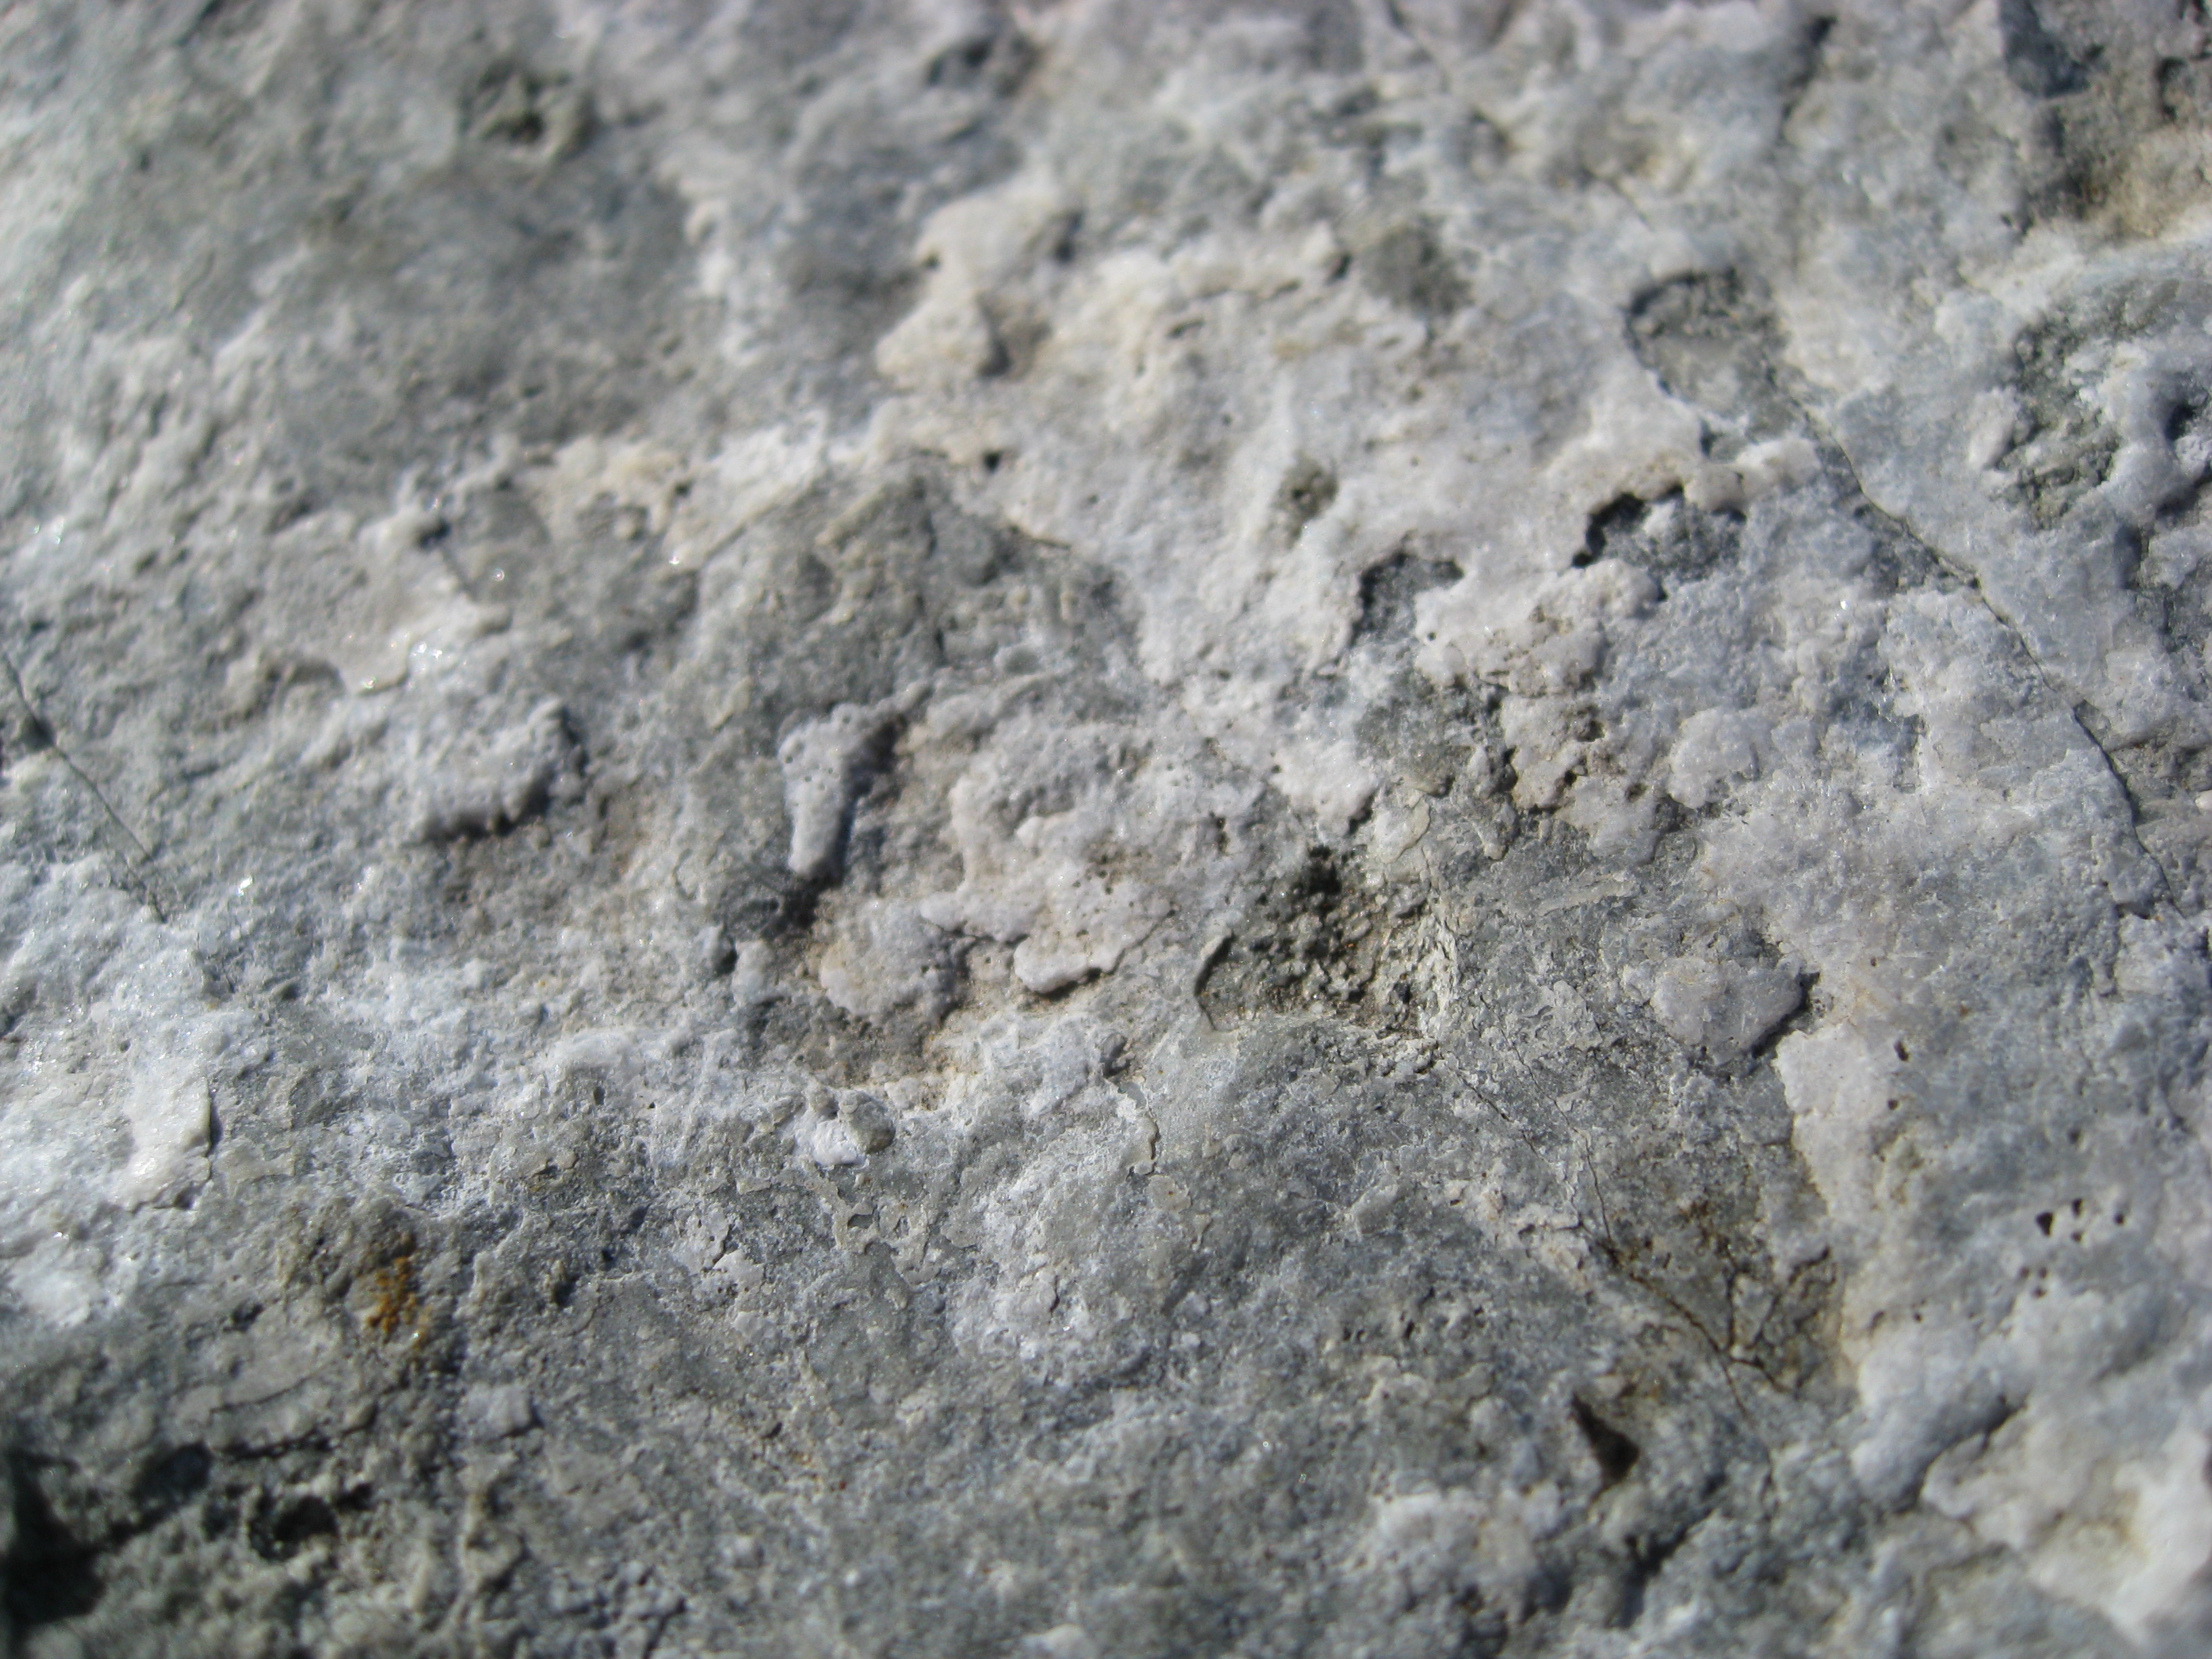 White and Gray Stone Surface | photo page - everystockphoto